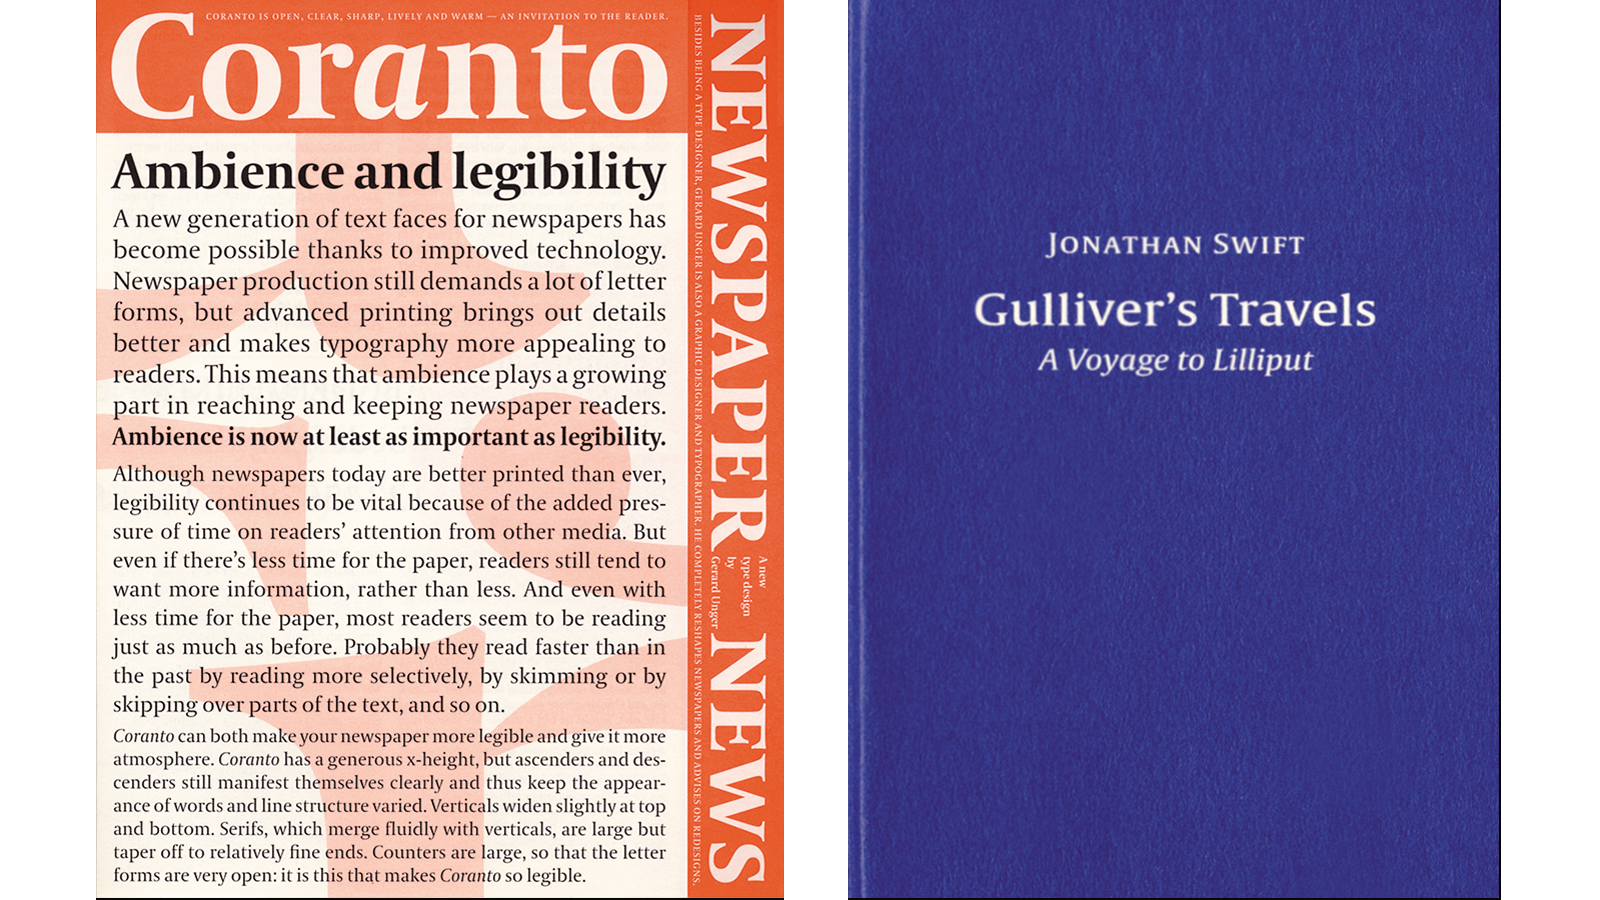 Gerard Unger, leaflet for Coranto and XS booklet for Gulliver